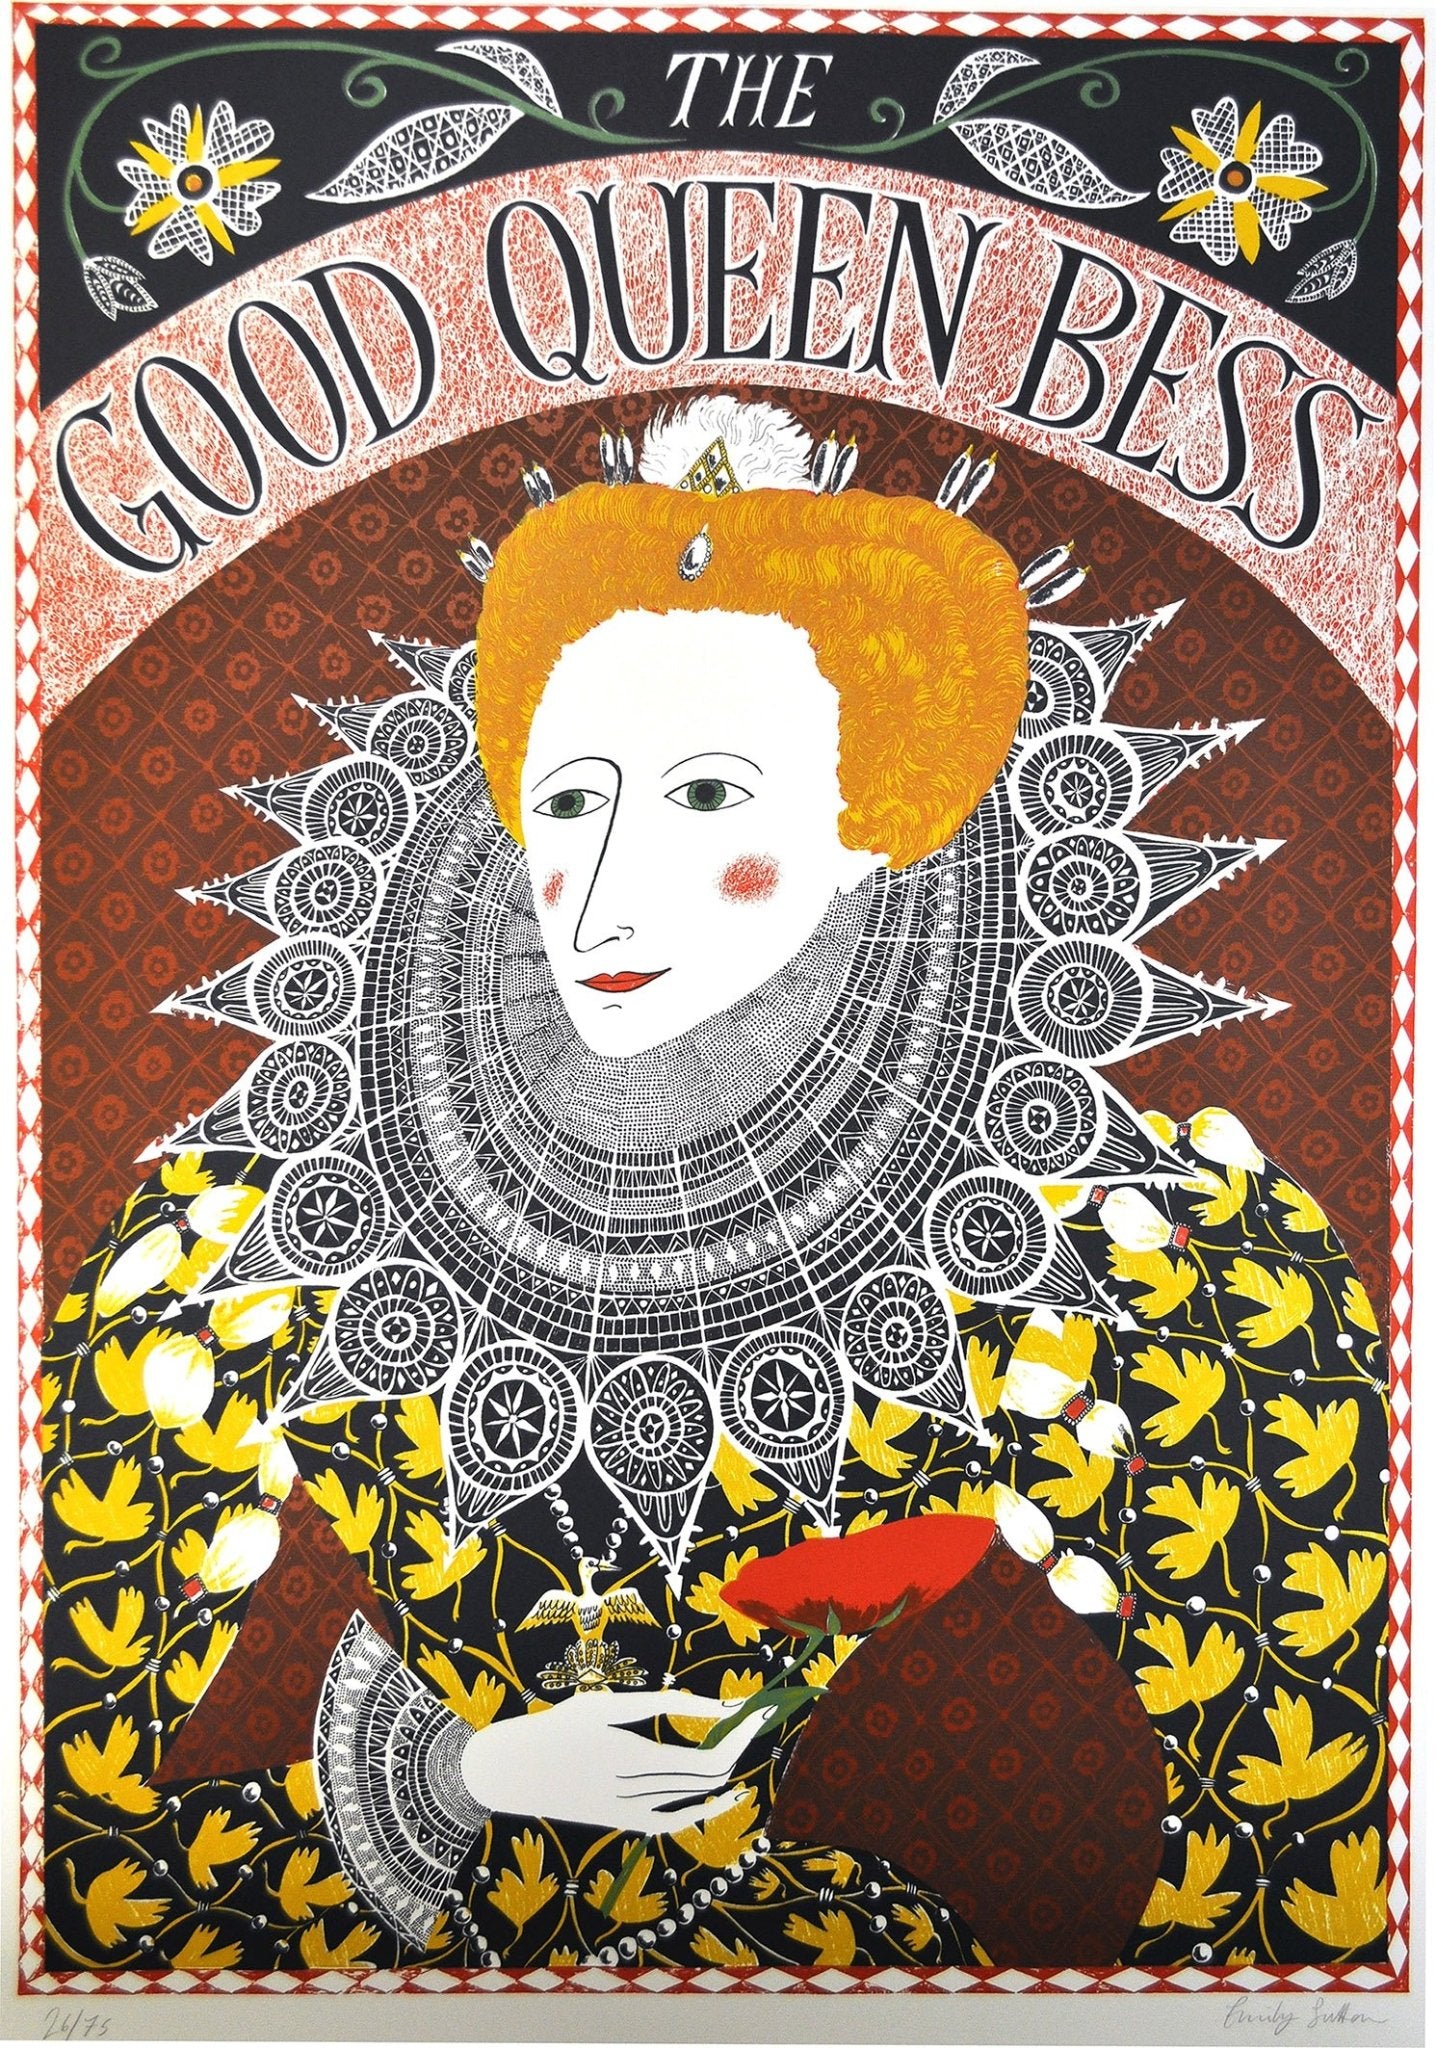 The Good Queen Bess, an original screen print by Emily Sutton and the Penfold Press